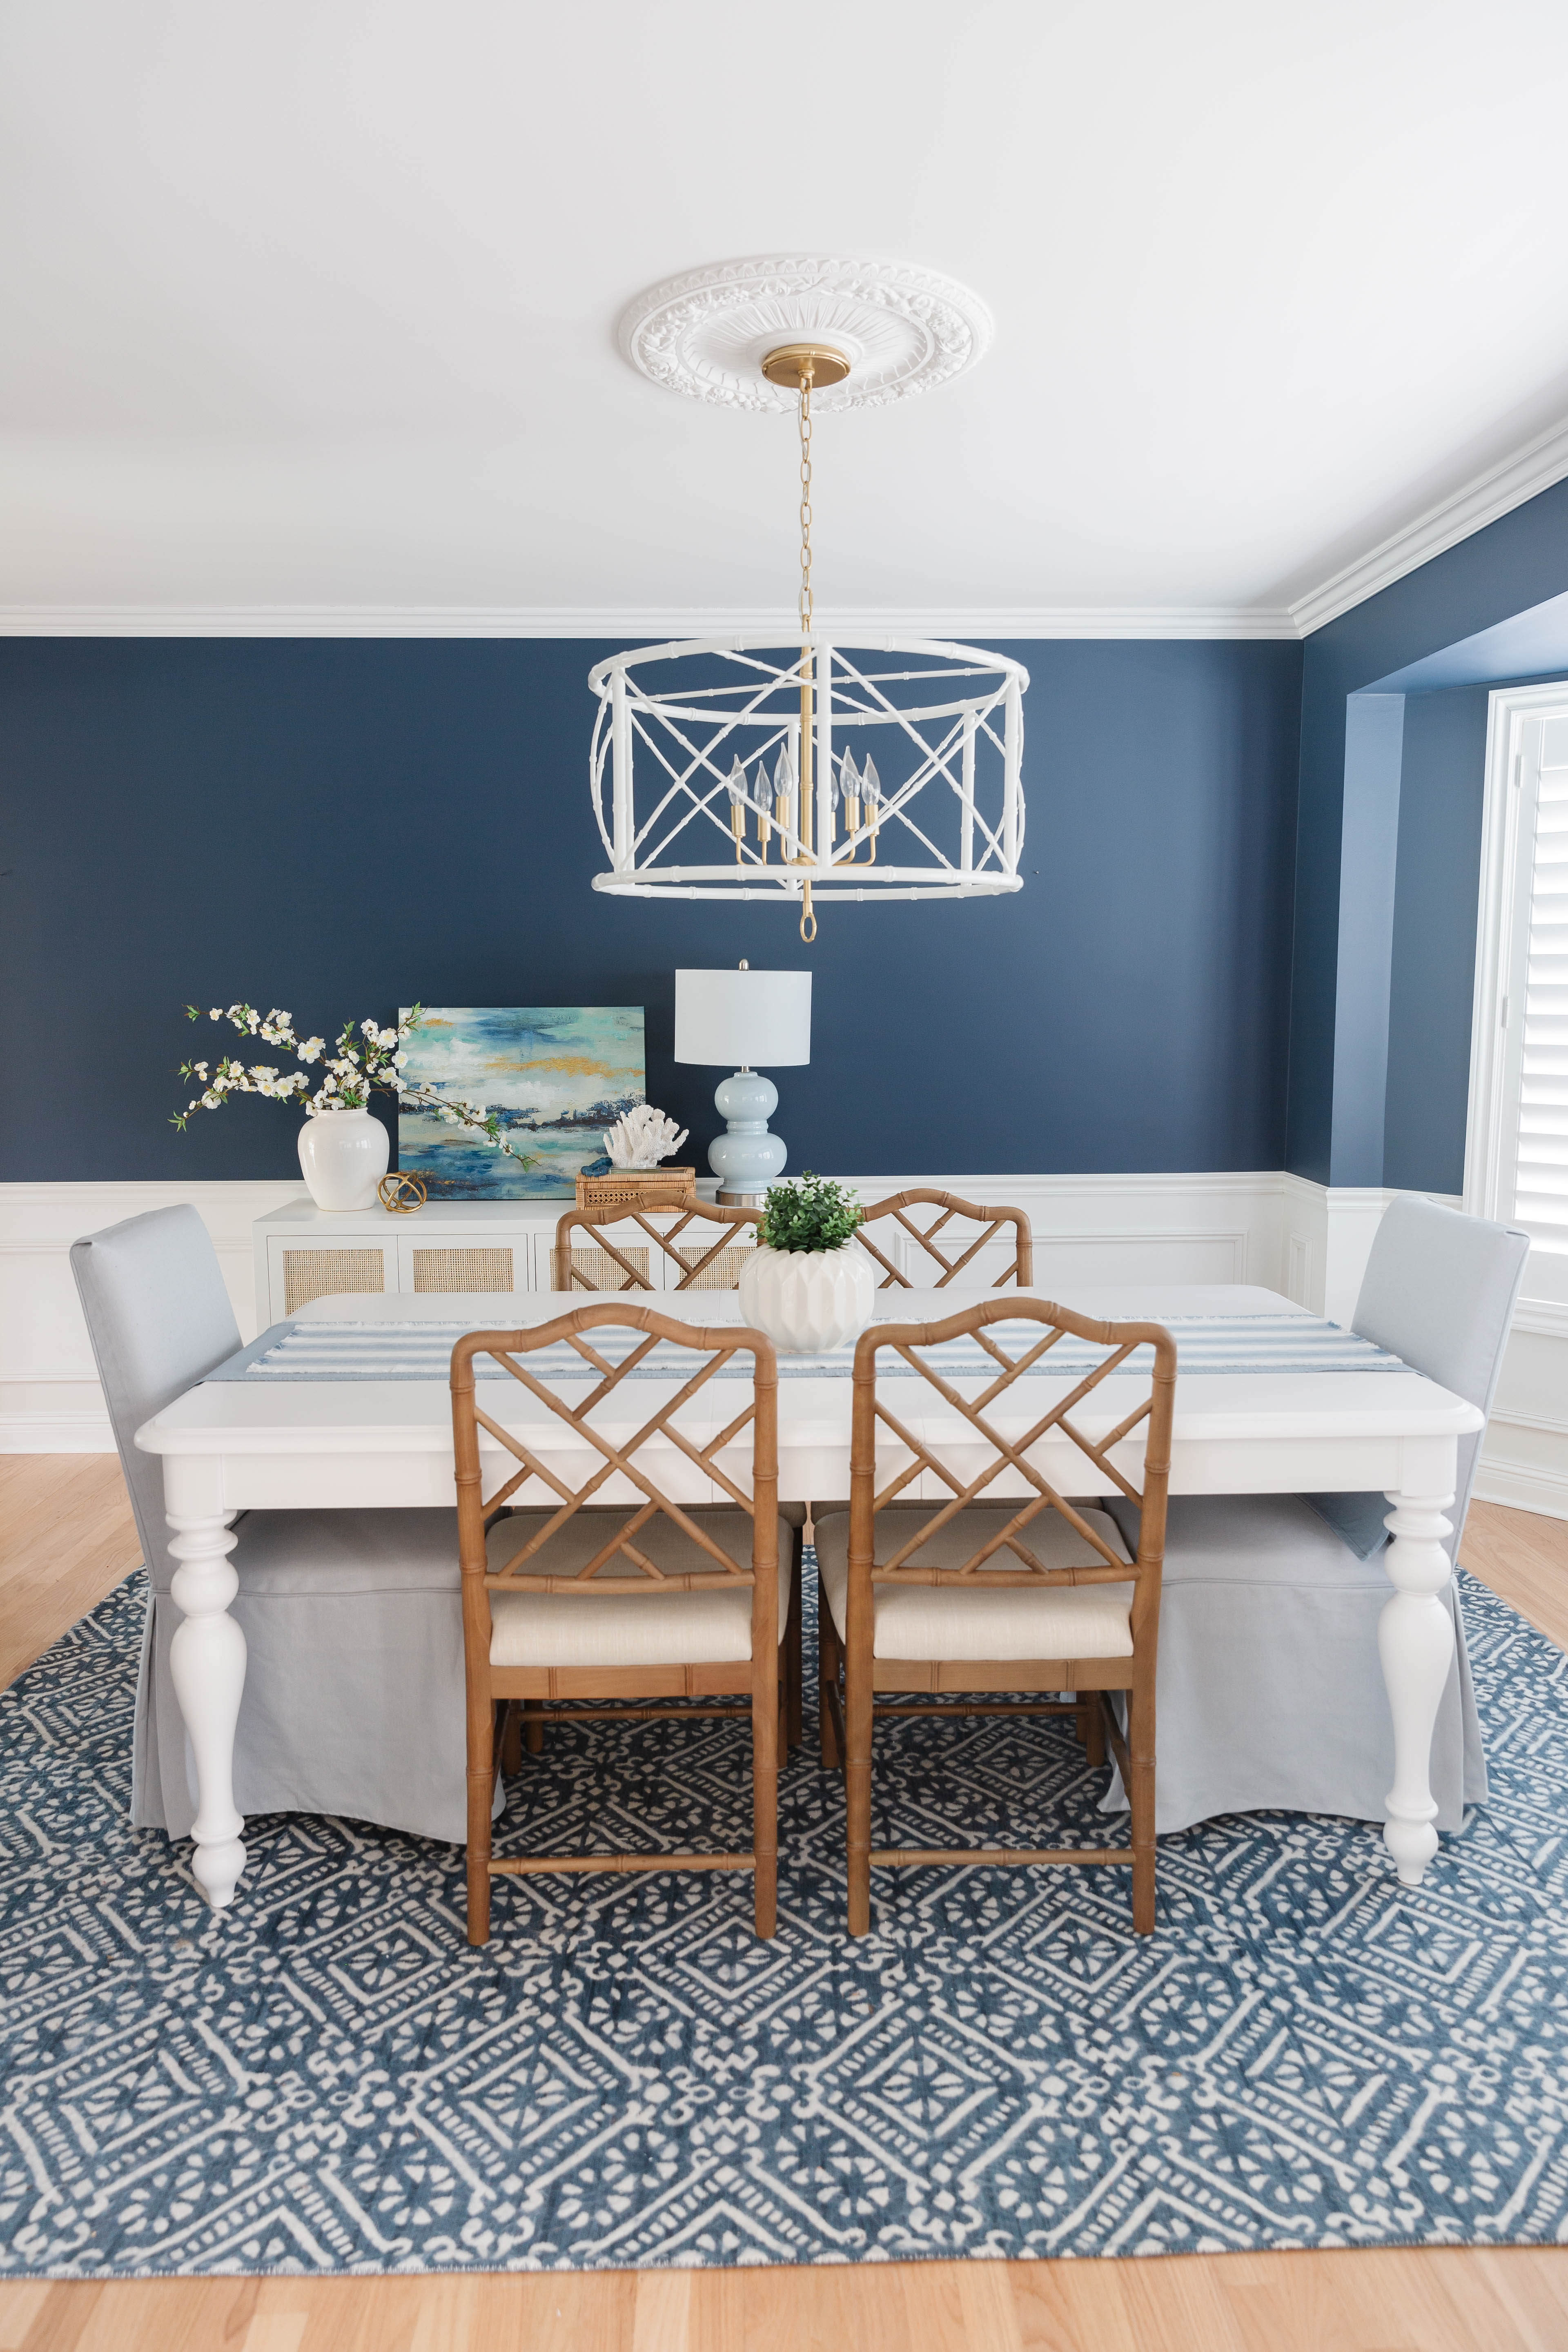 Our Navy Blue Dining Room Newport Lane, Blue Dining Room